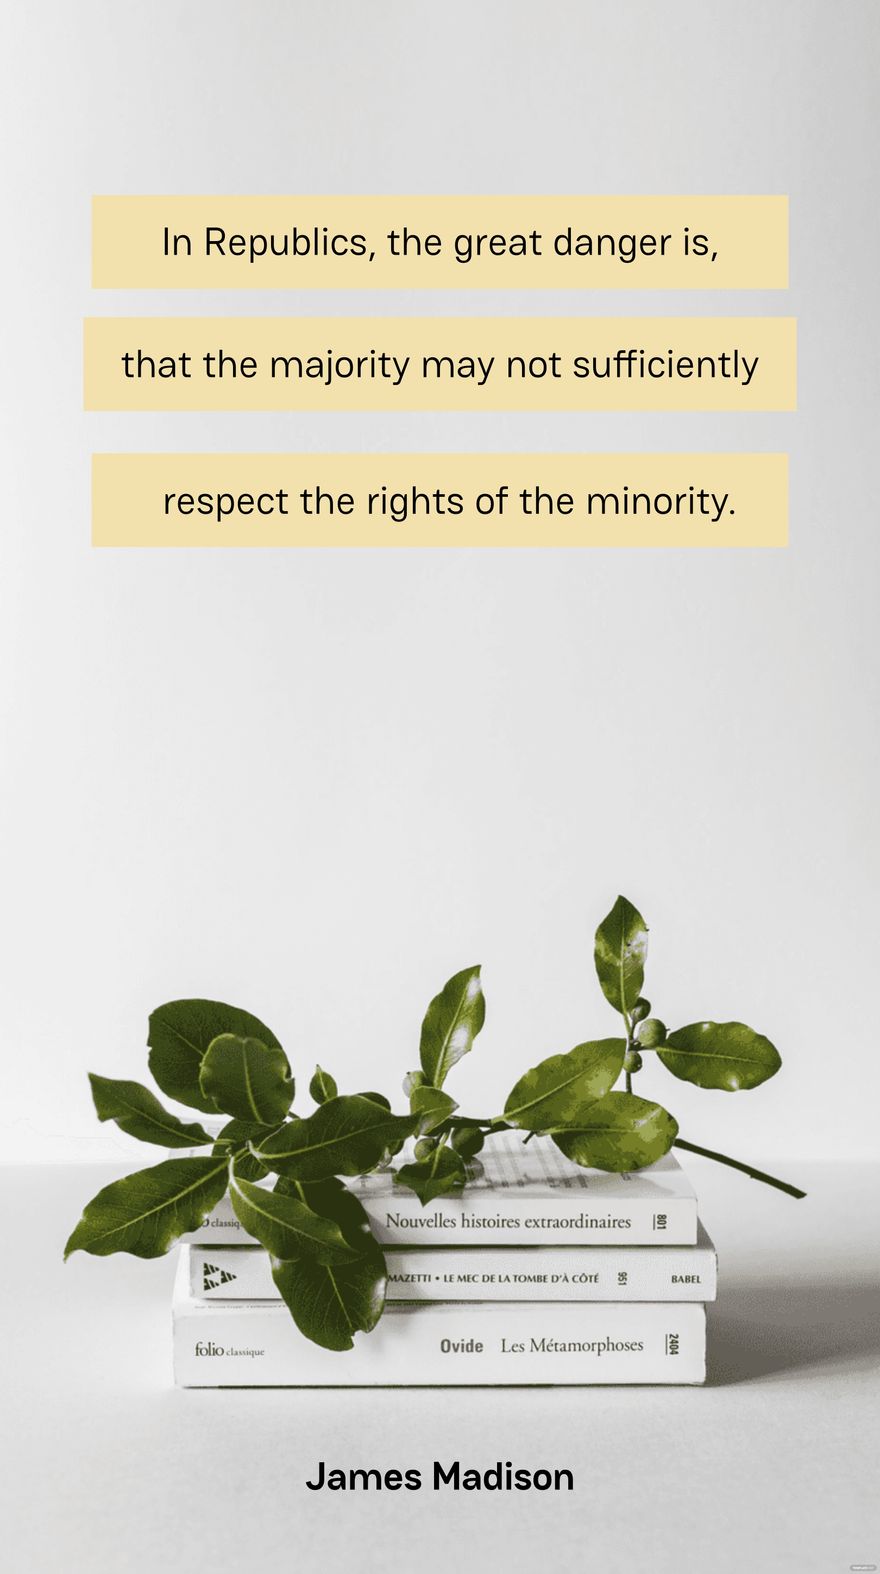 Free In Republics, the great danger is, that the majority may not sufficiently respect the rights of the minority. - James Madison